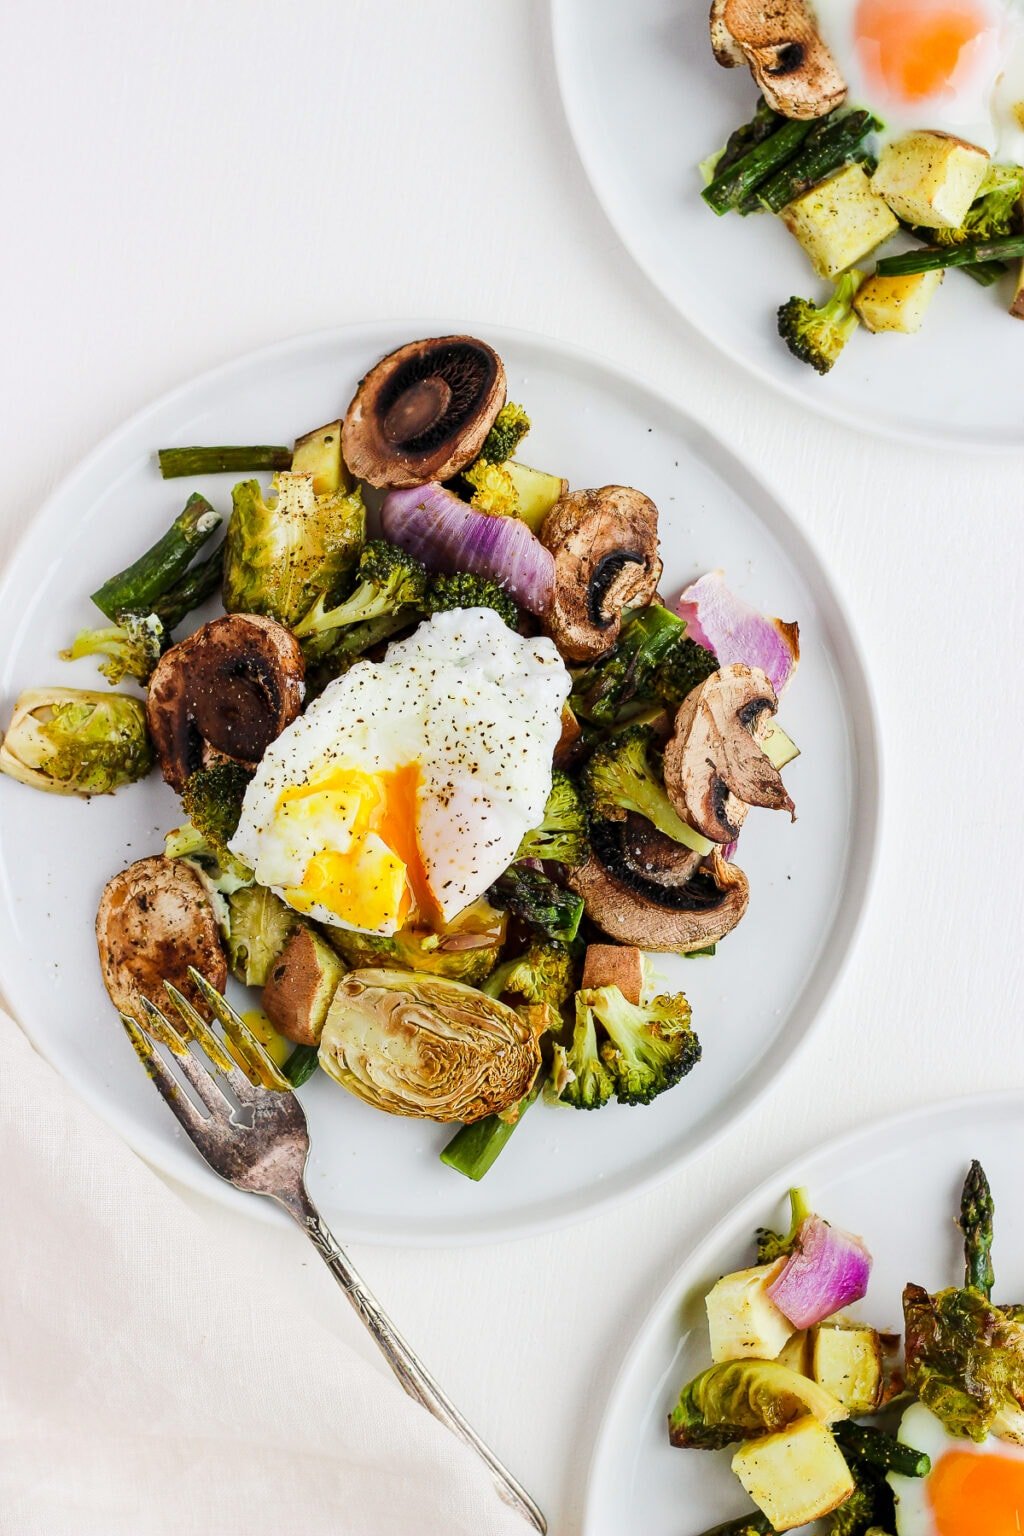 Weeknight Roasted Veggies with Poached Egg - The Wooden Skillet